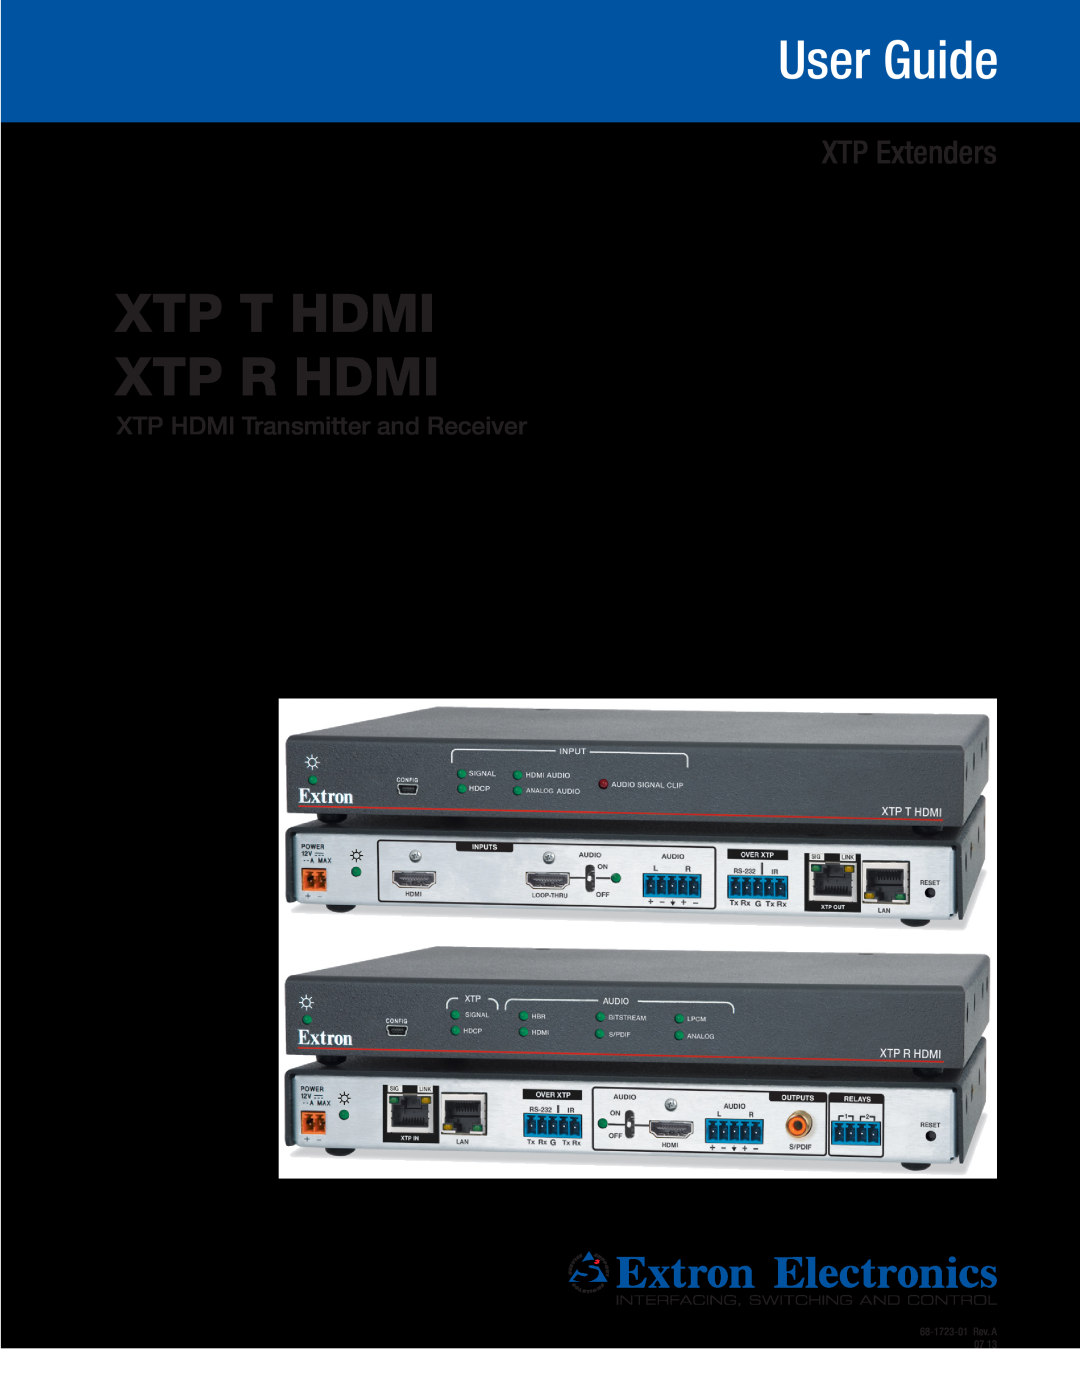 Extron electronic XTP T HDMI manual Xtp T Hdmi Xtp R Hdmi, XTP Extenders, User Guide, XTP HDMI Transmitter and Receiver 